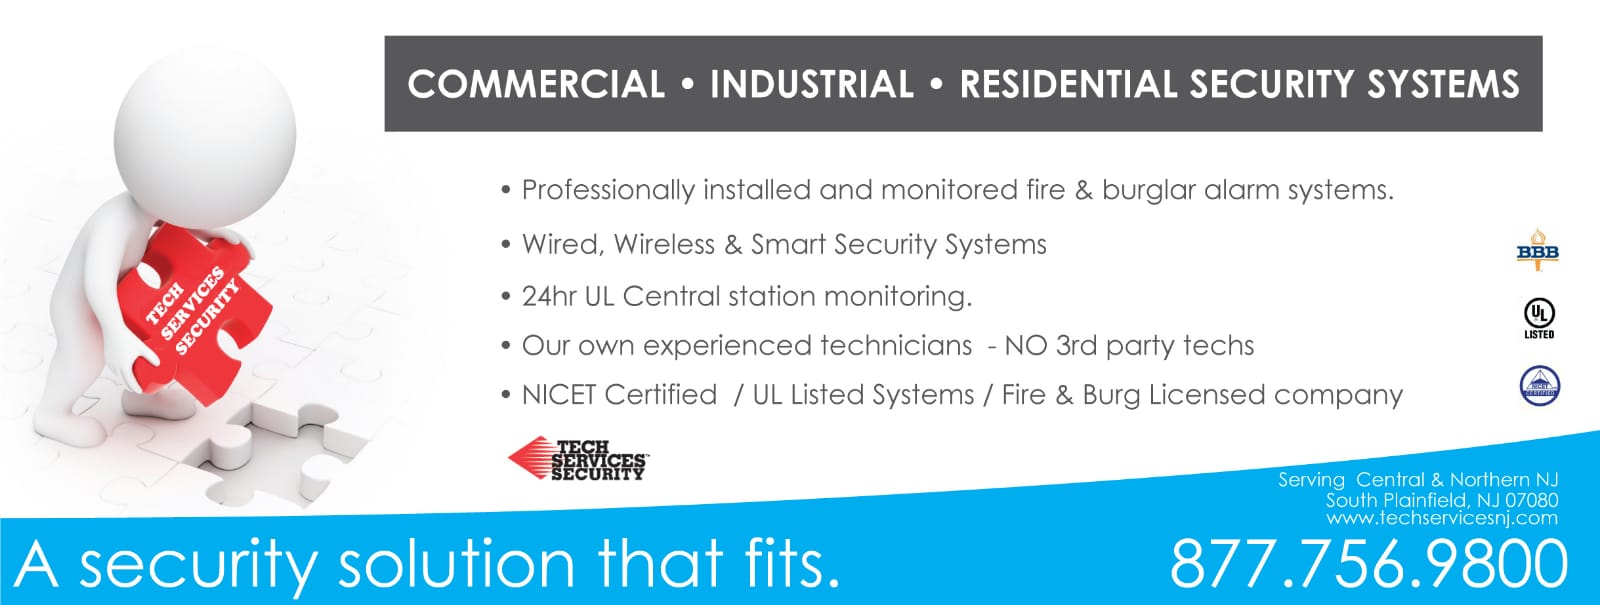 Ensure the safety of your business with expert fire alarm installation services from Tech Services of NJ in NJ